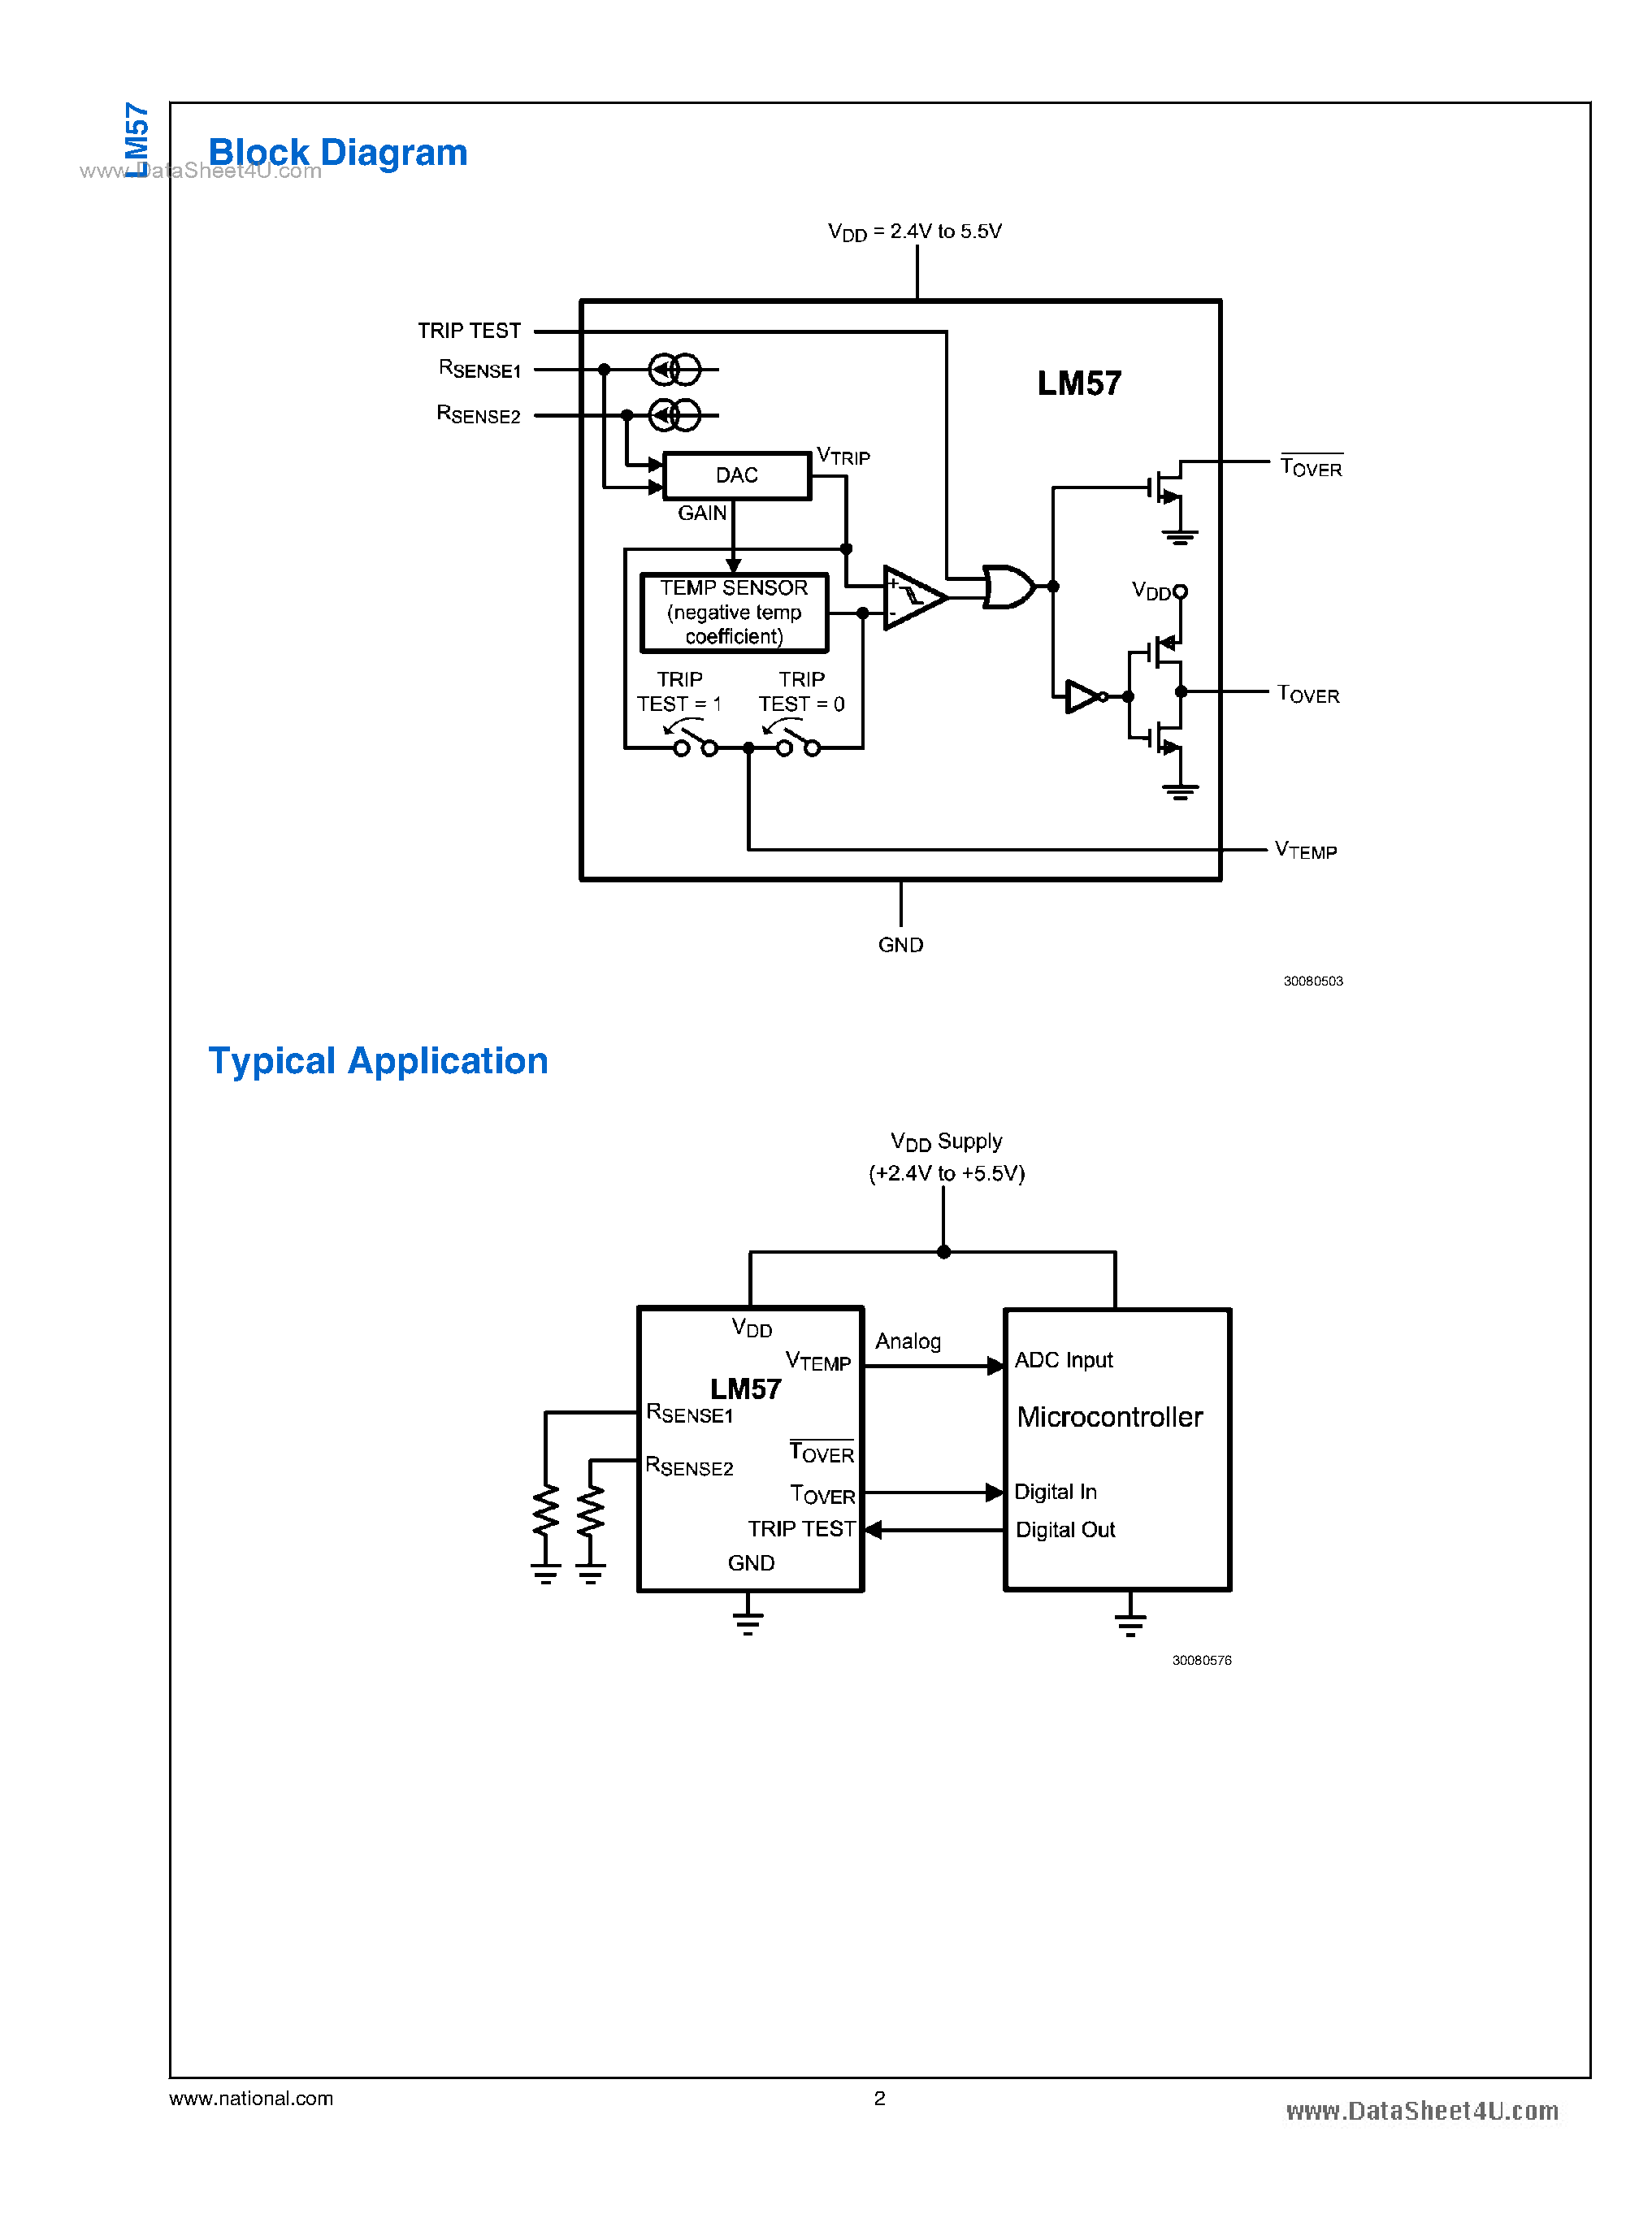 Datasheet LM57 - Resistor-Programmable Temperature Switch And Analog Temperature Sensor page 2